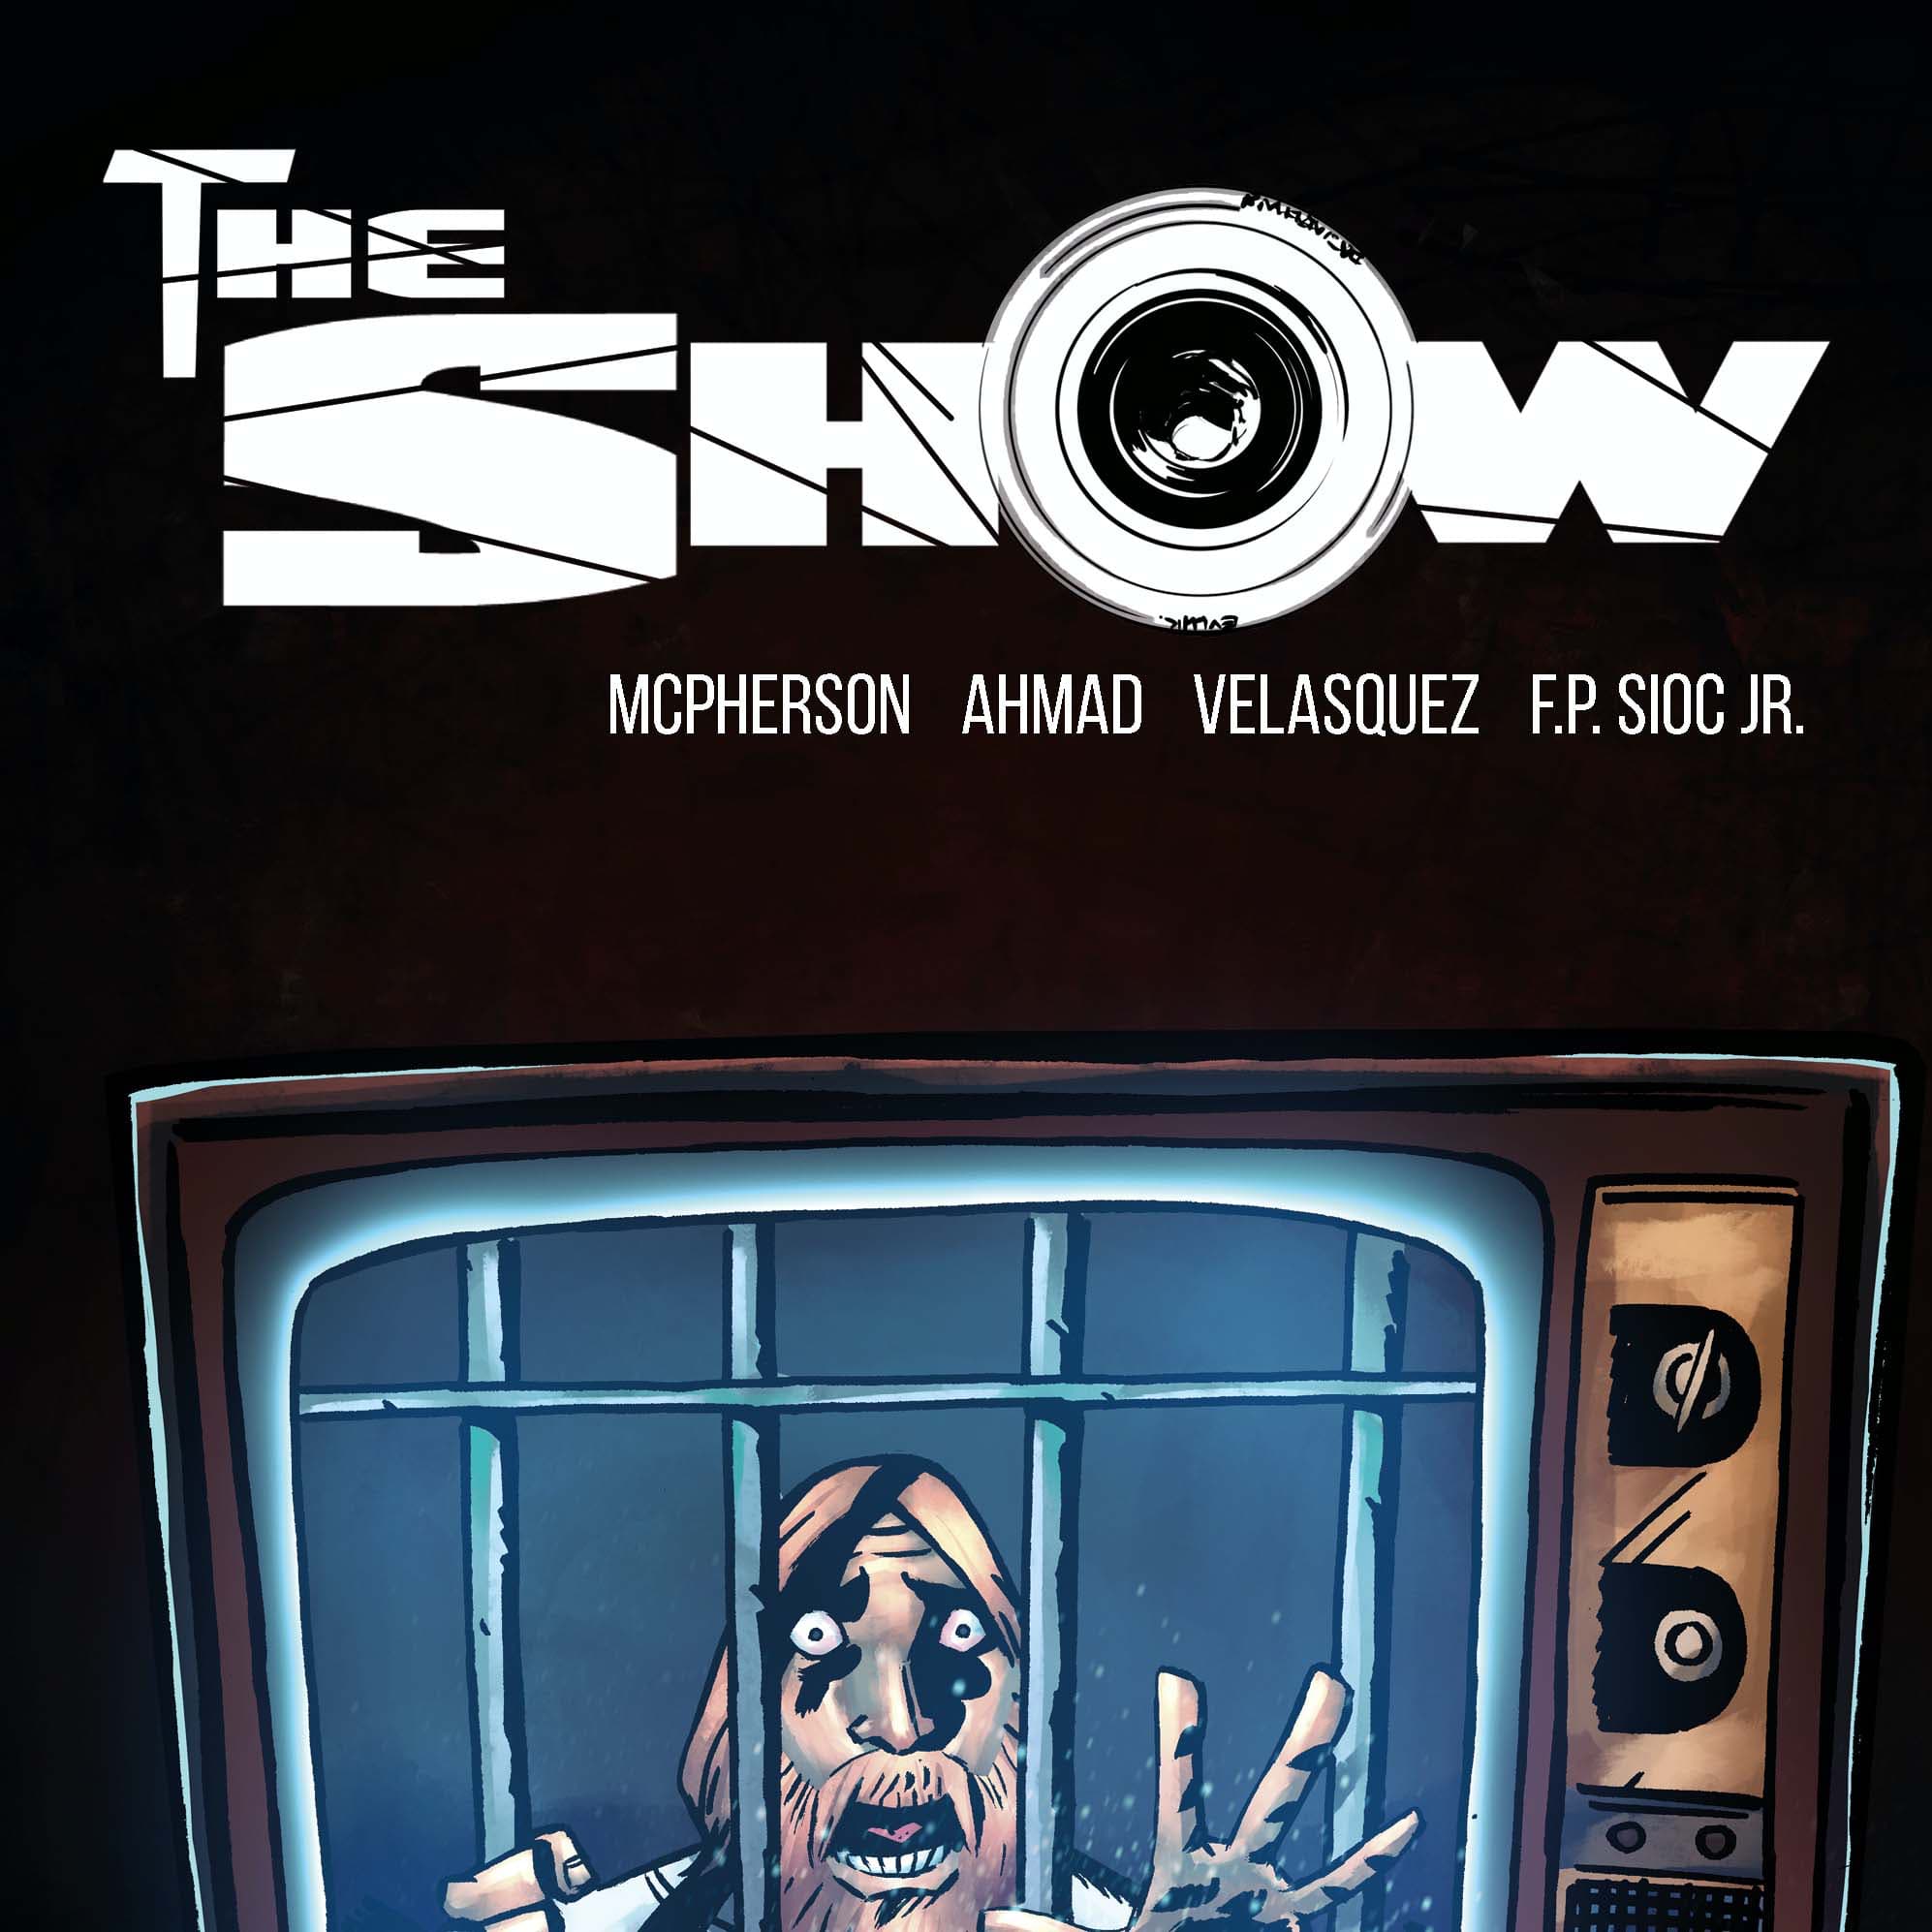 The Show OGN cover showing the main character imprisoned in a tv.